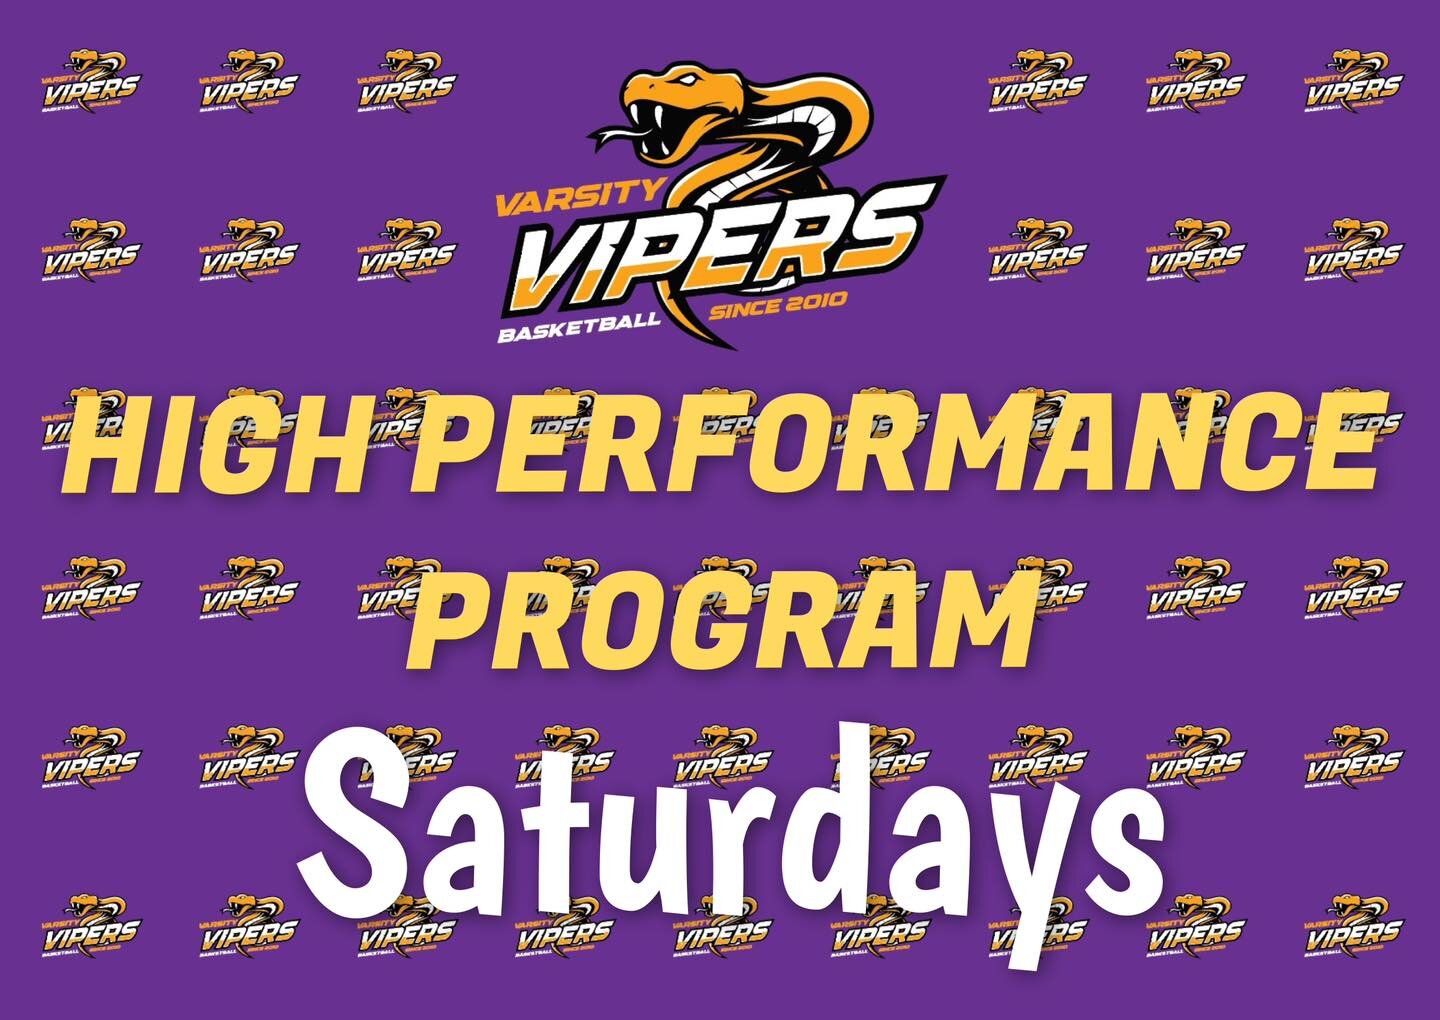 VIPERS HPP IS BACK! 🏀

Due to popular demand, our Vipers High Performance Program is back!

Starting this coming Saturday, players can join Coaches Adam Darragh, Scott McGregor and Simon Stevens as they conduct a 1 hour high performance session each